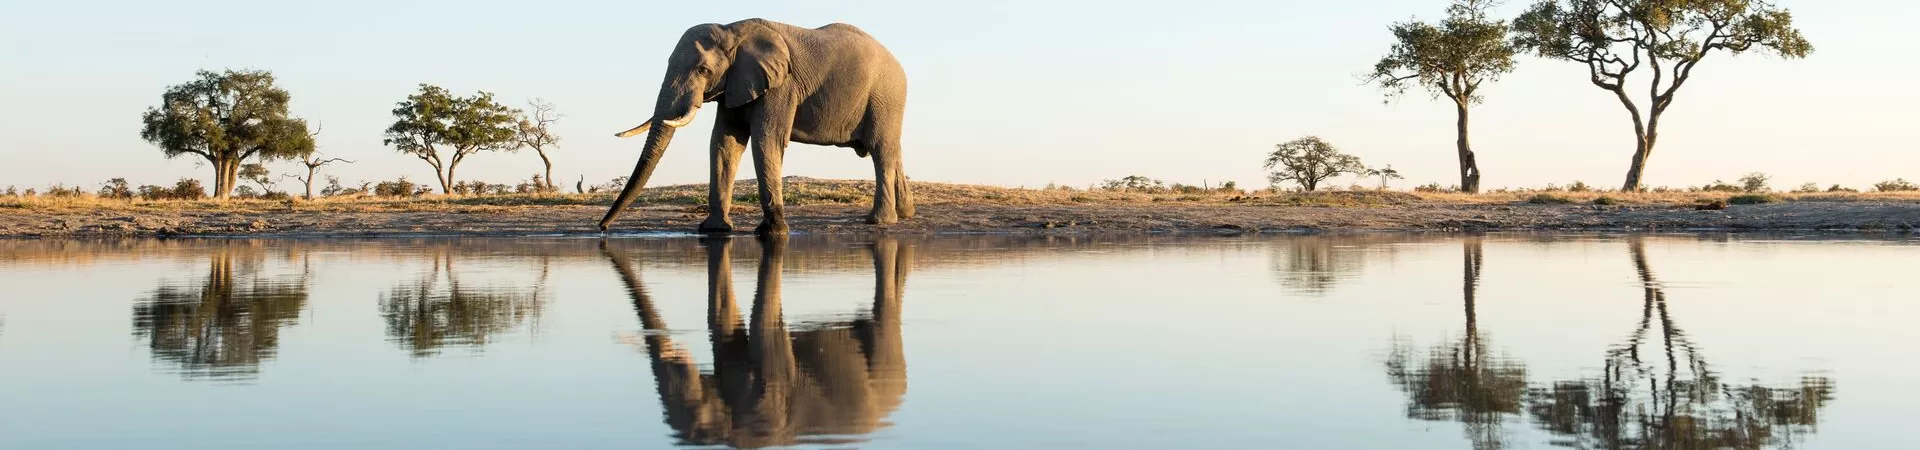 African Elephant walking next to water